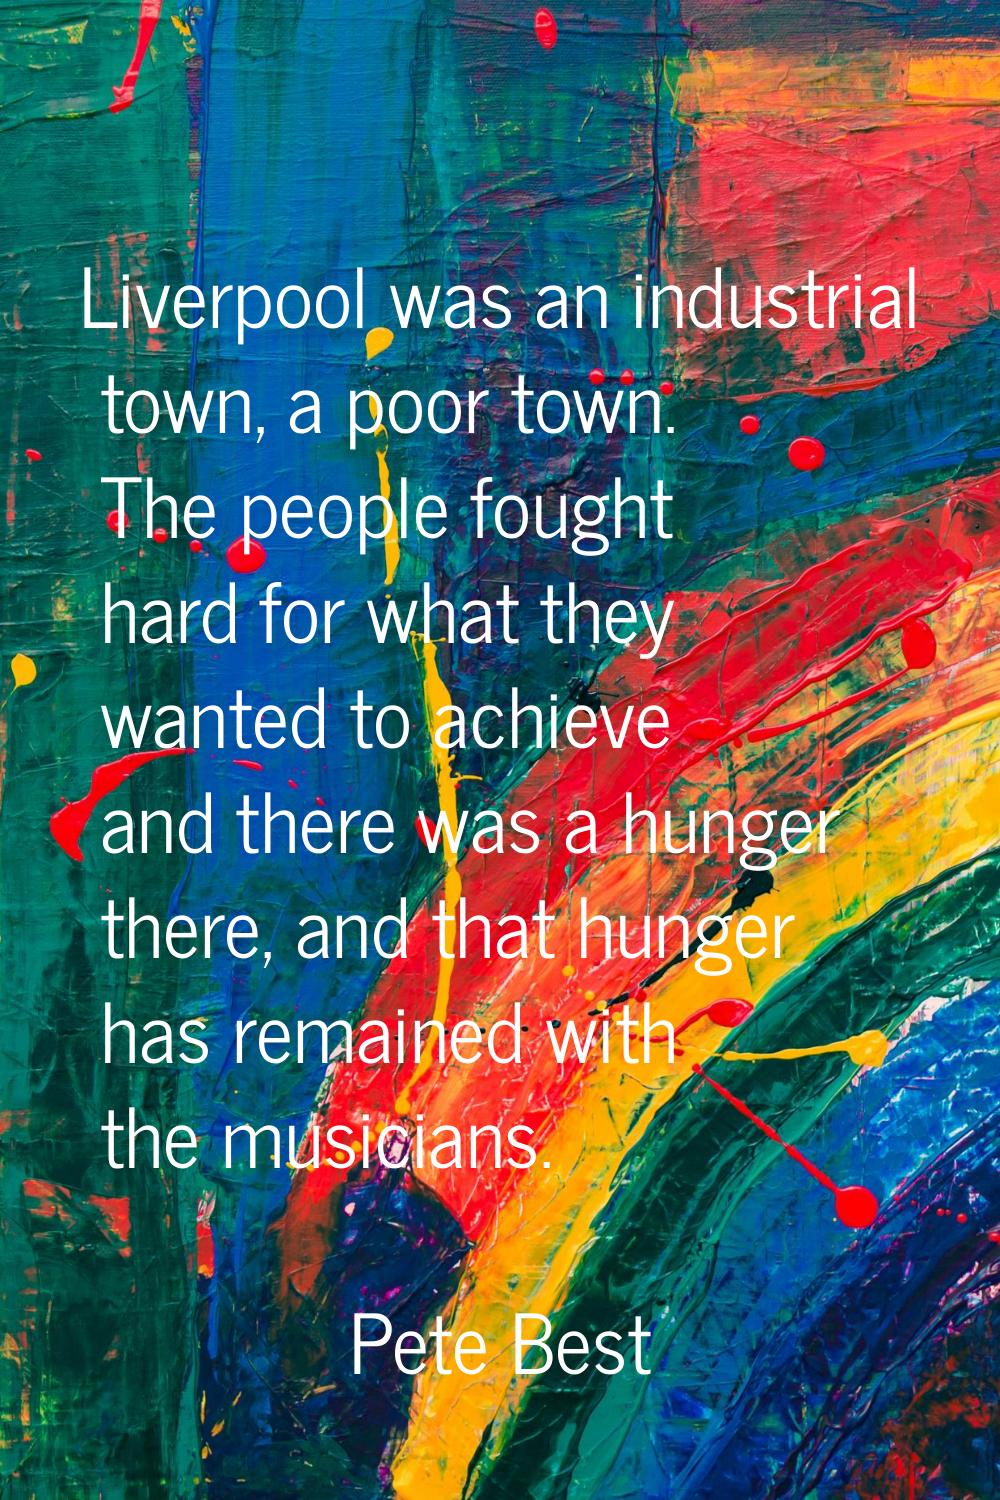 Liverpool was an industrial town, a poor town. The people fought hard for what they wanted to achie